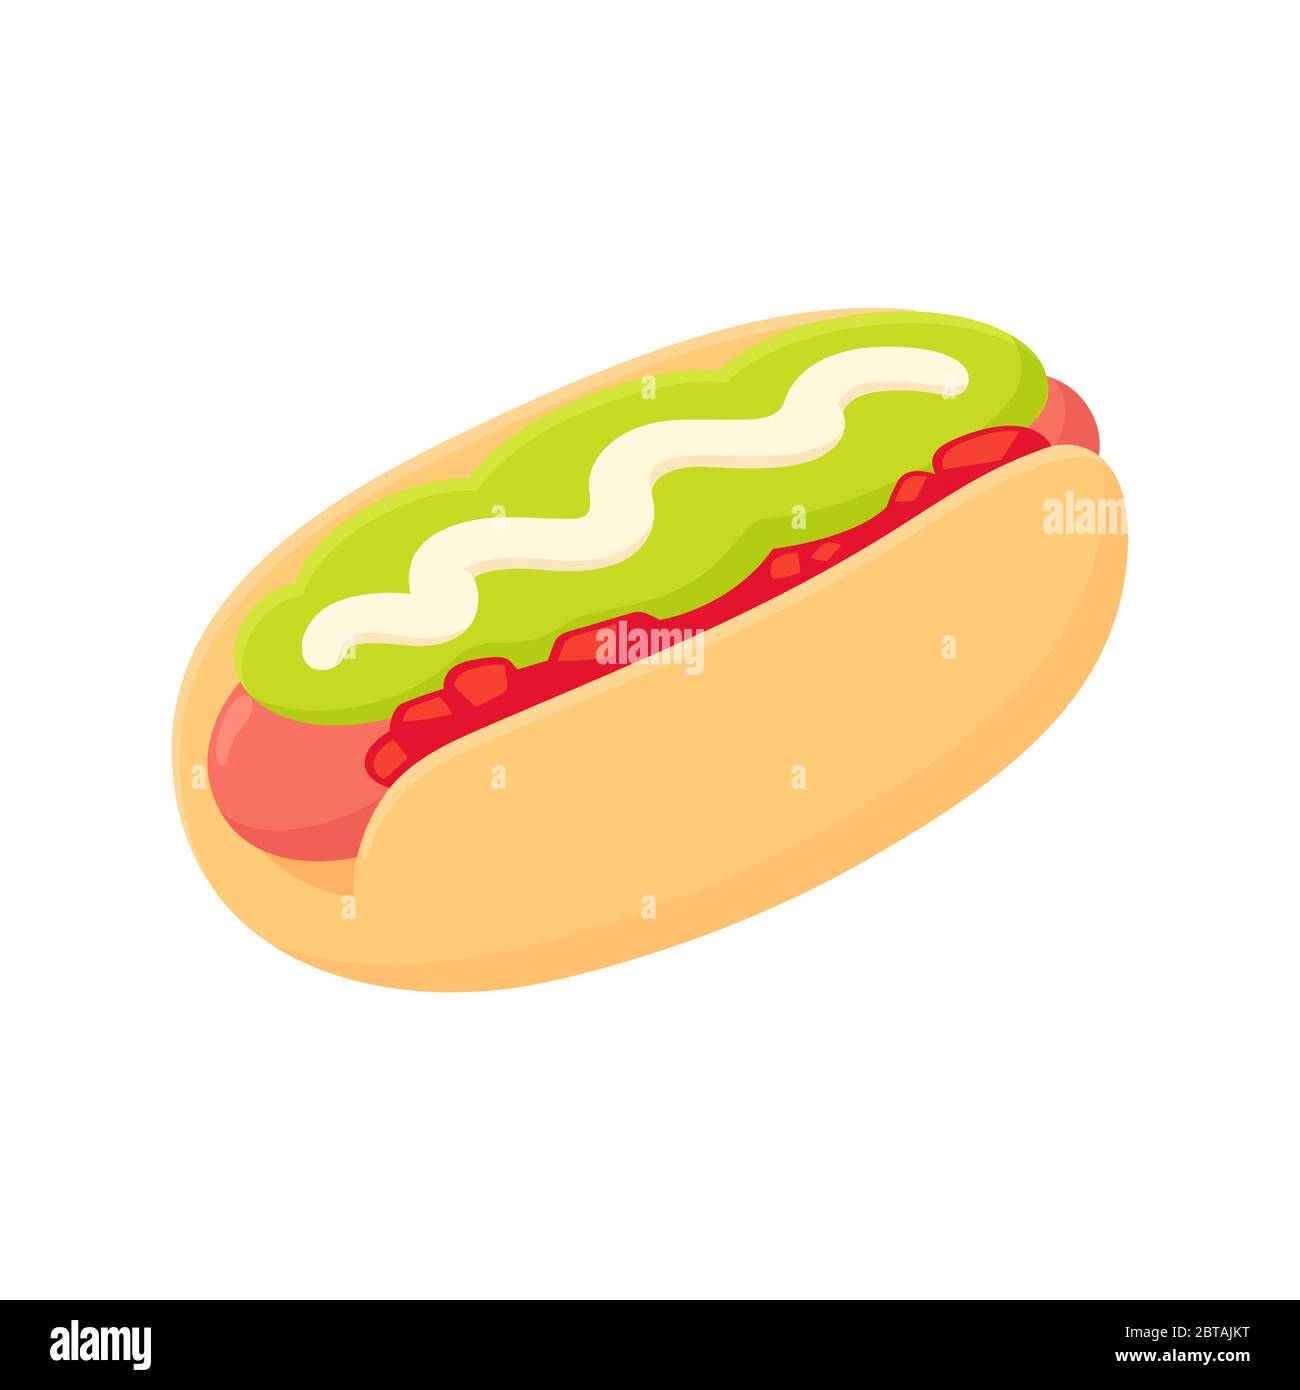 Hot dog with tomato, avocado and mayo. Traditional fast food sandwich, popular in Chile as 'Completo Italiano'. Flat cartoon style isolated vector ill Stock Vector